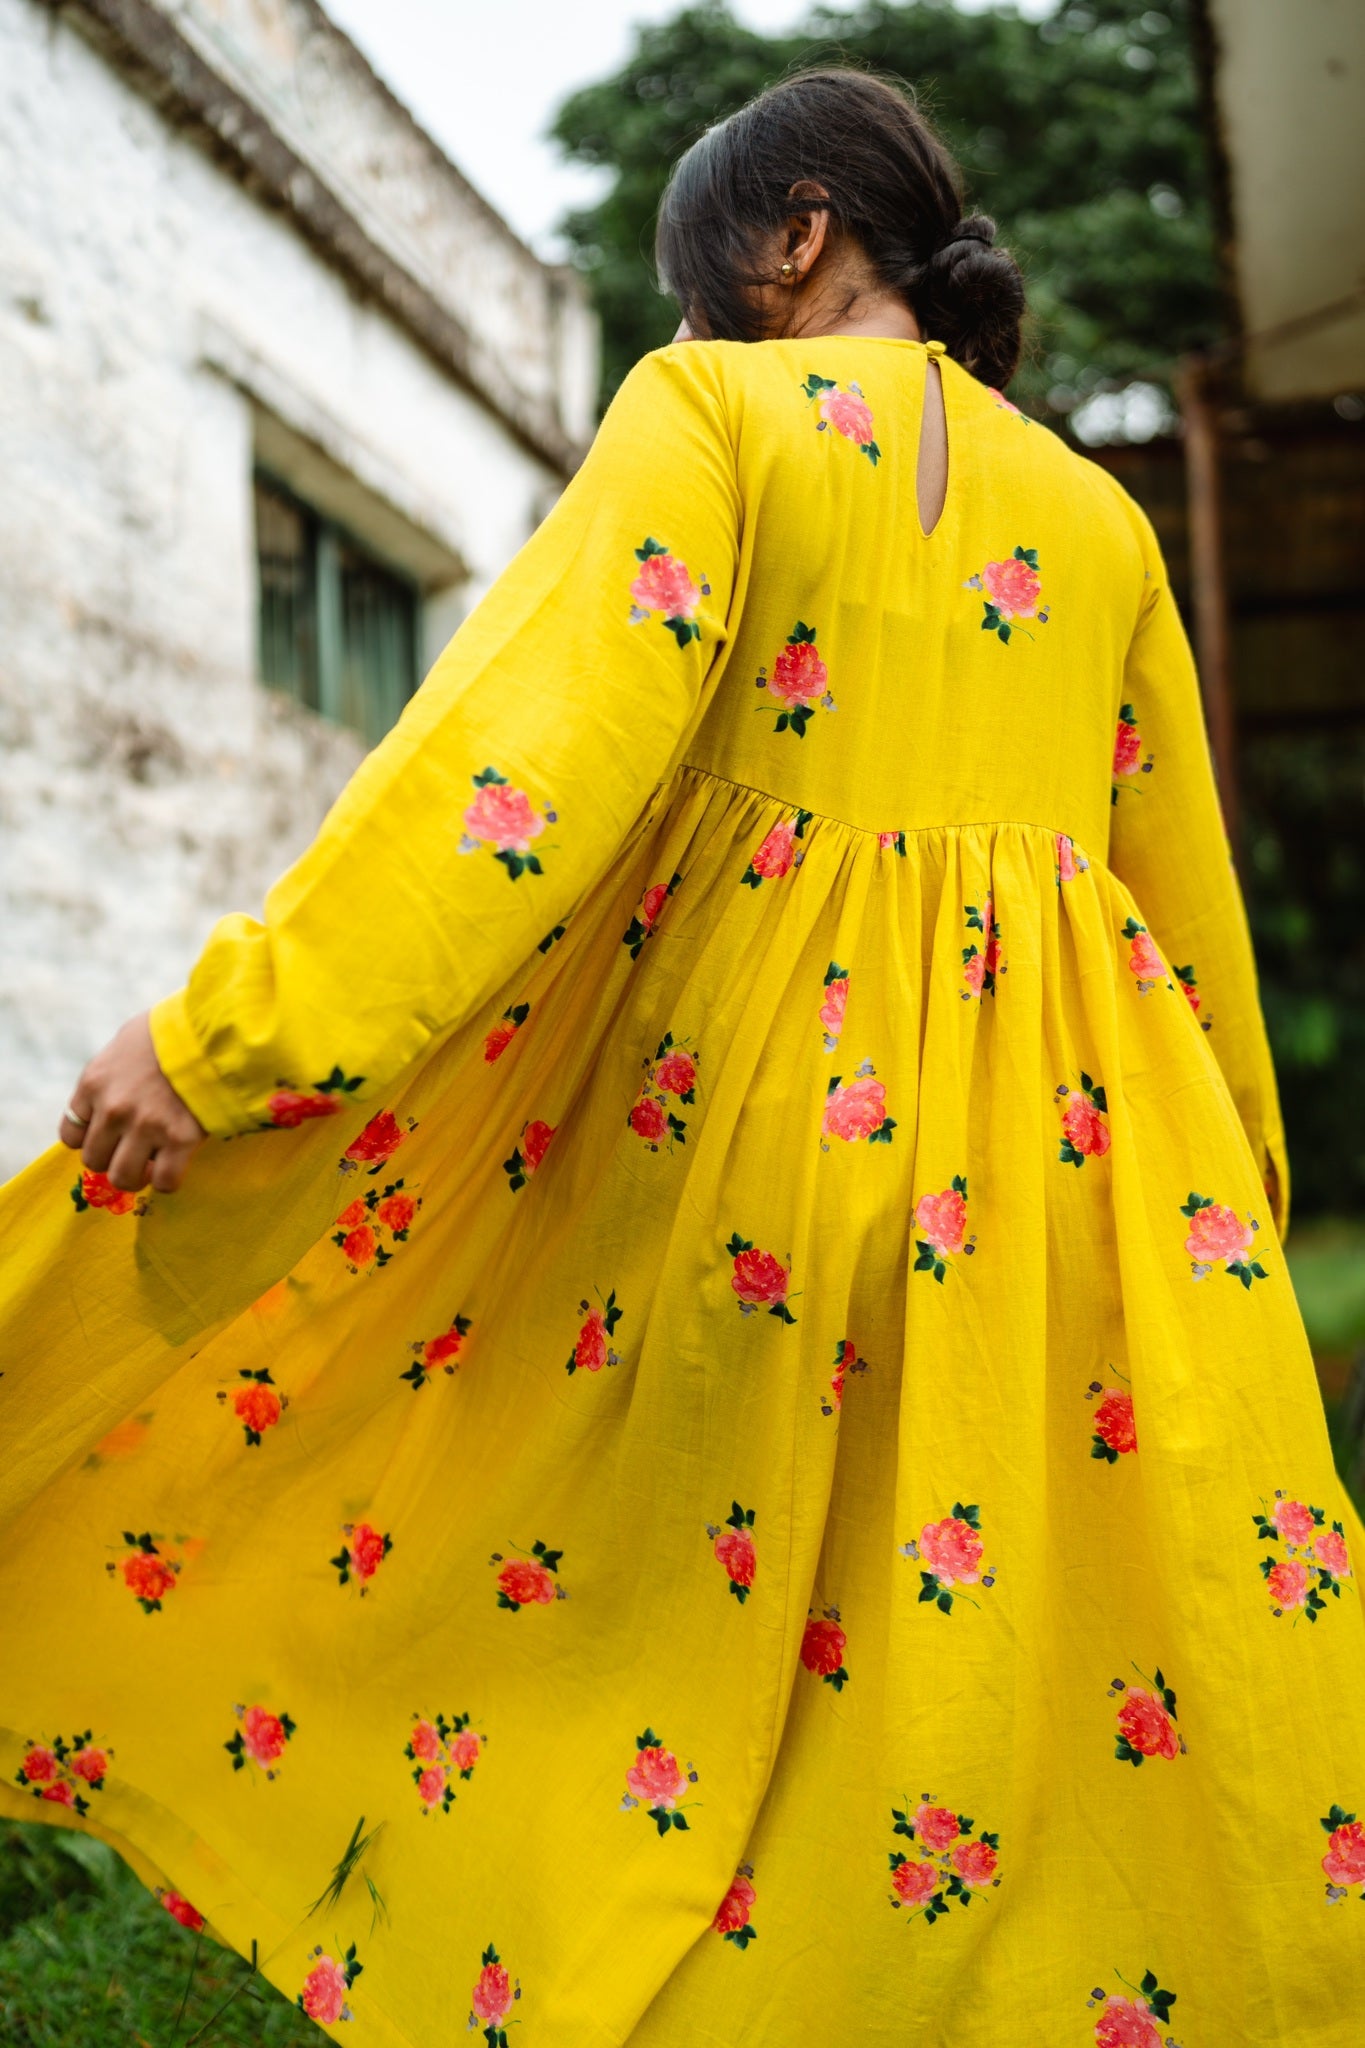 TREEJM's Rangeela Dress in vibrant lime yellow is handwoven cotton perfection, with flowing gathers ideal for sunny days. Enjoy its comfort and distinct print.